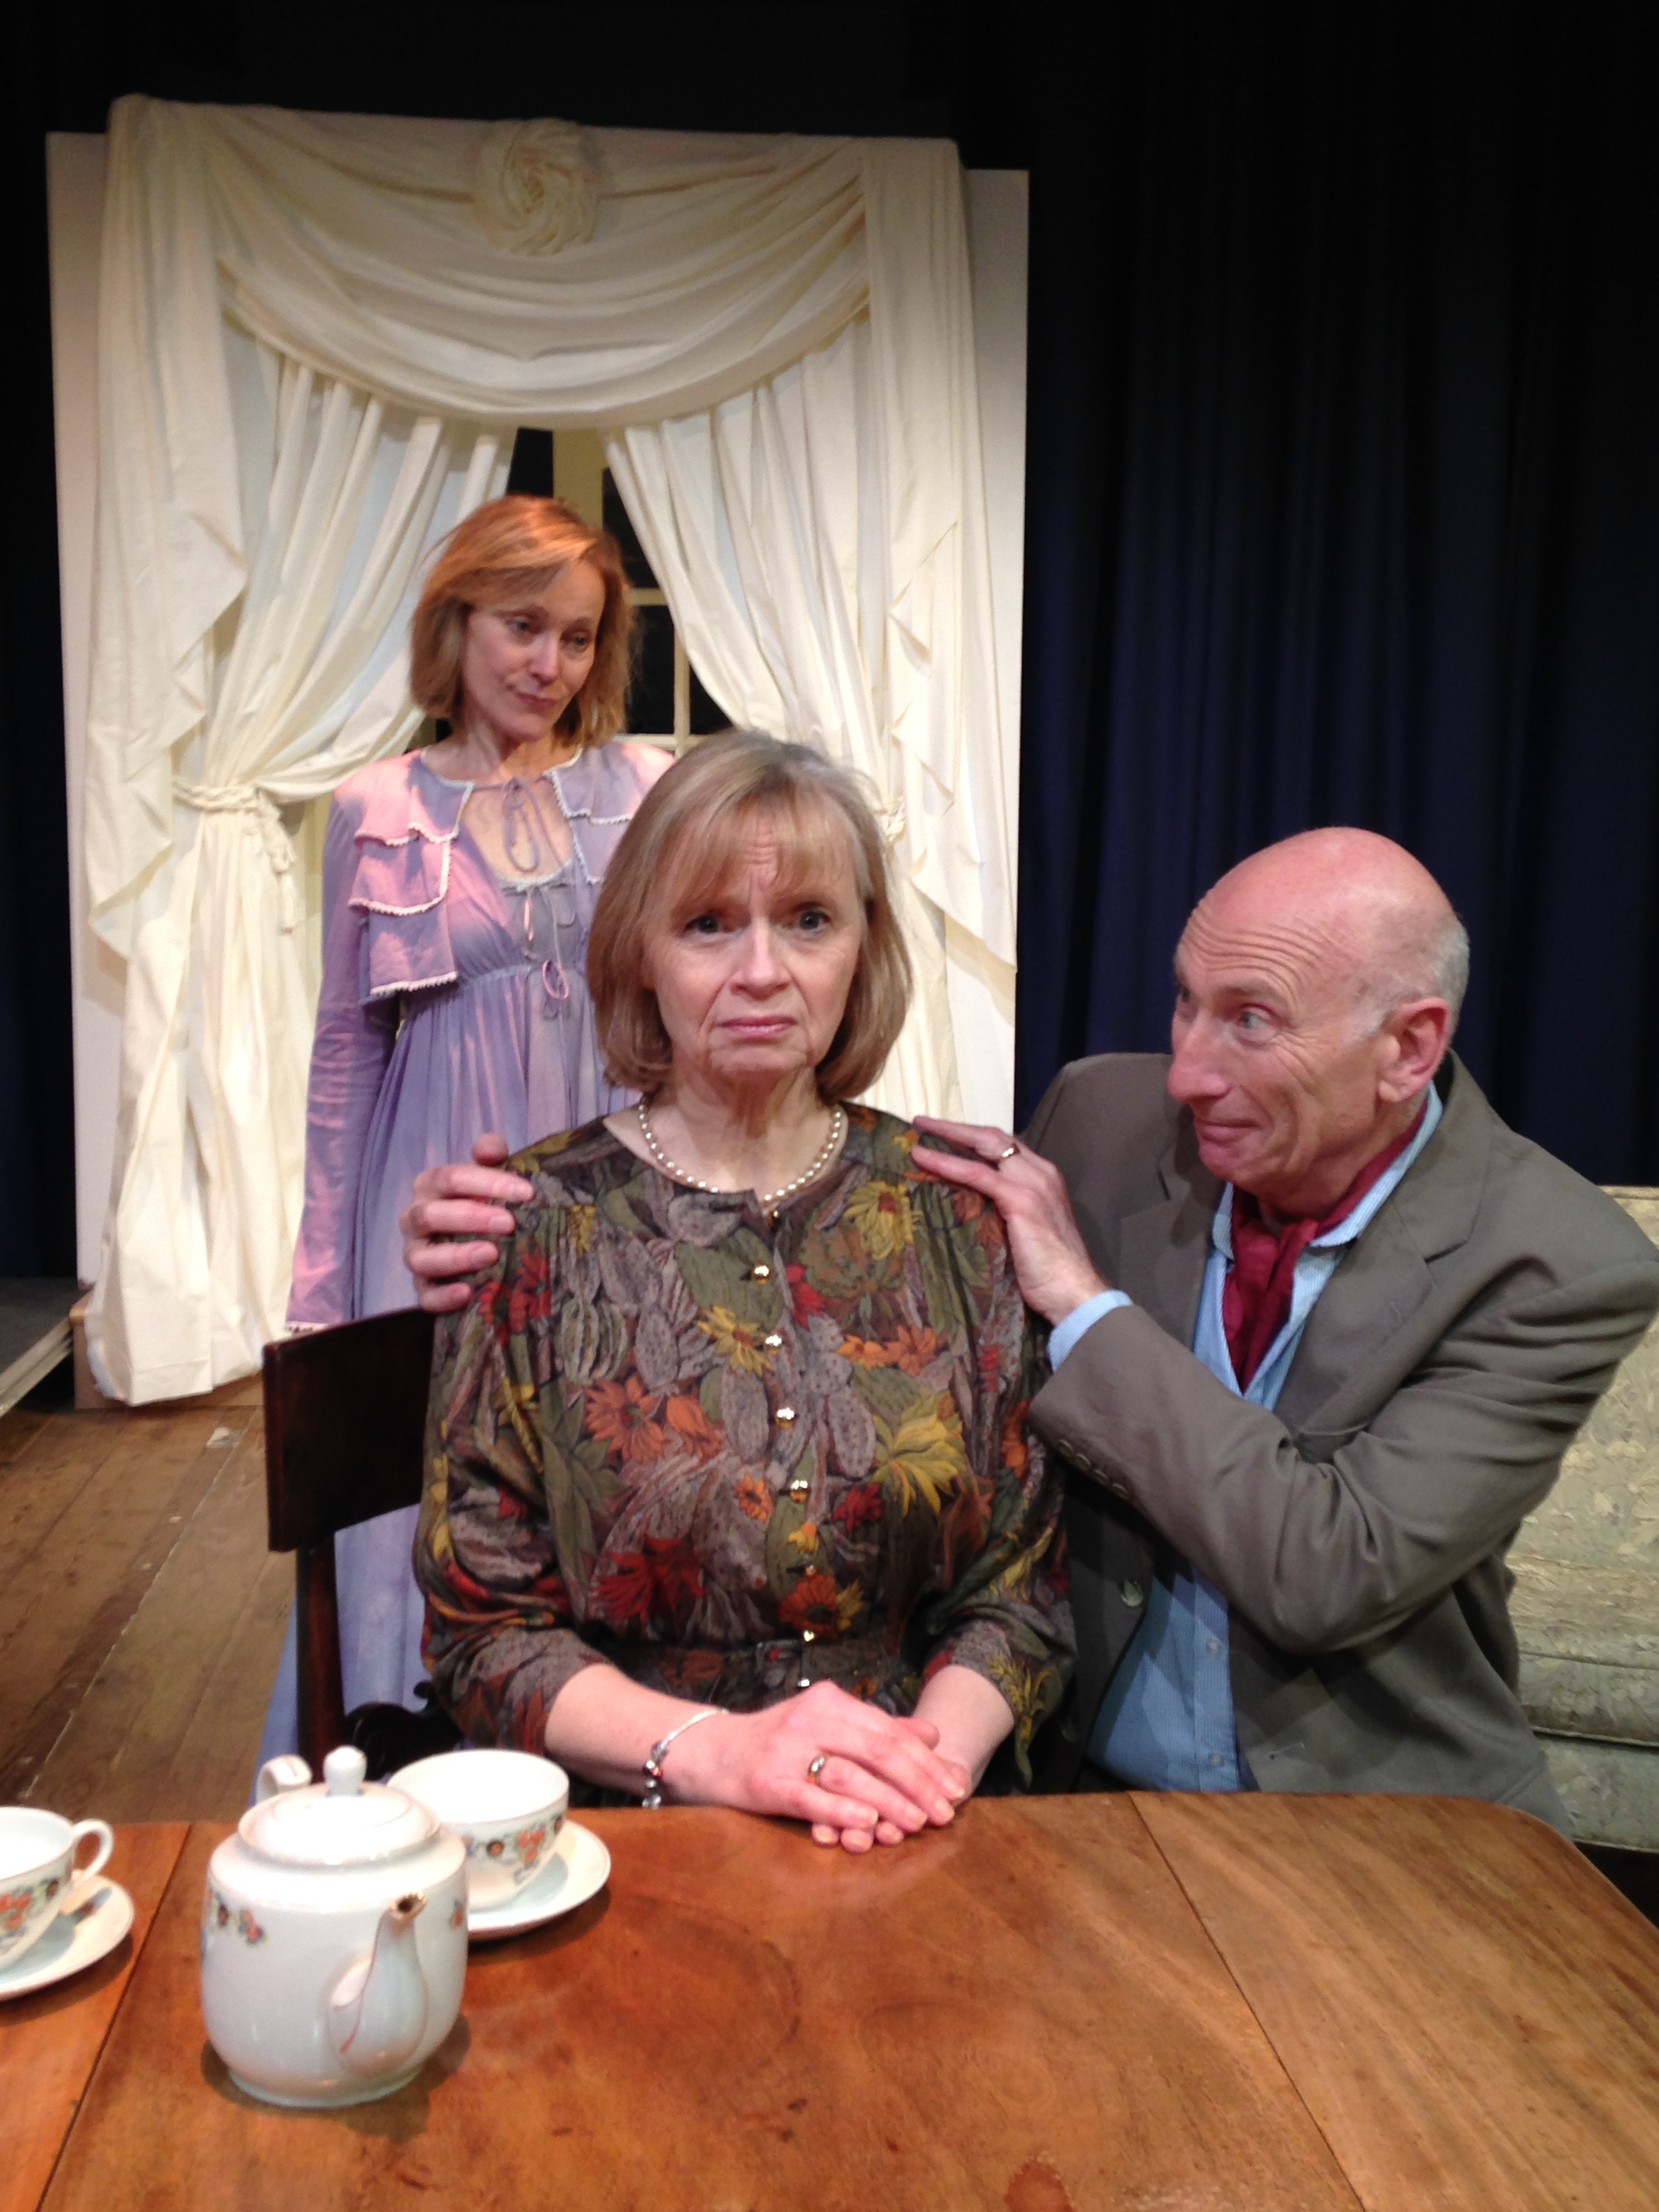 From left - Elvira (played by Caroline Groom) Ruth (played by Barabara Ingledew) and Charles (played by Lewis Cowen).jpg